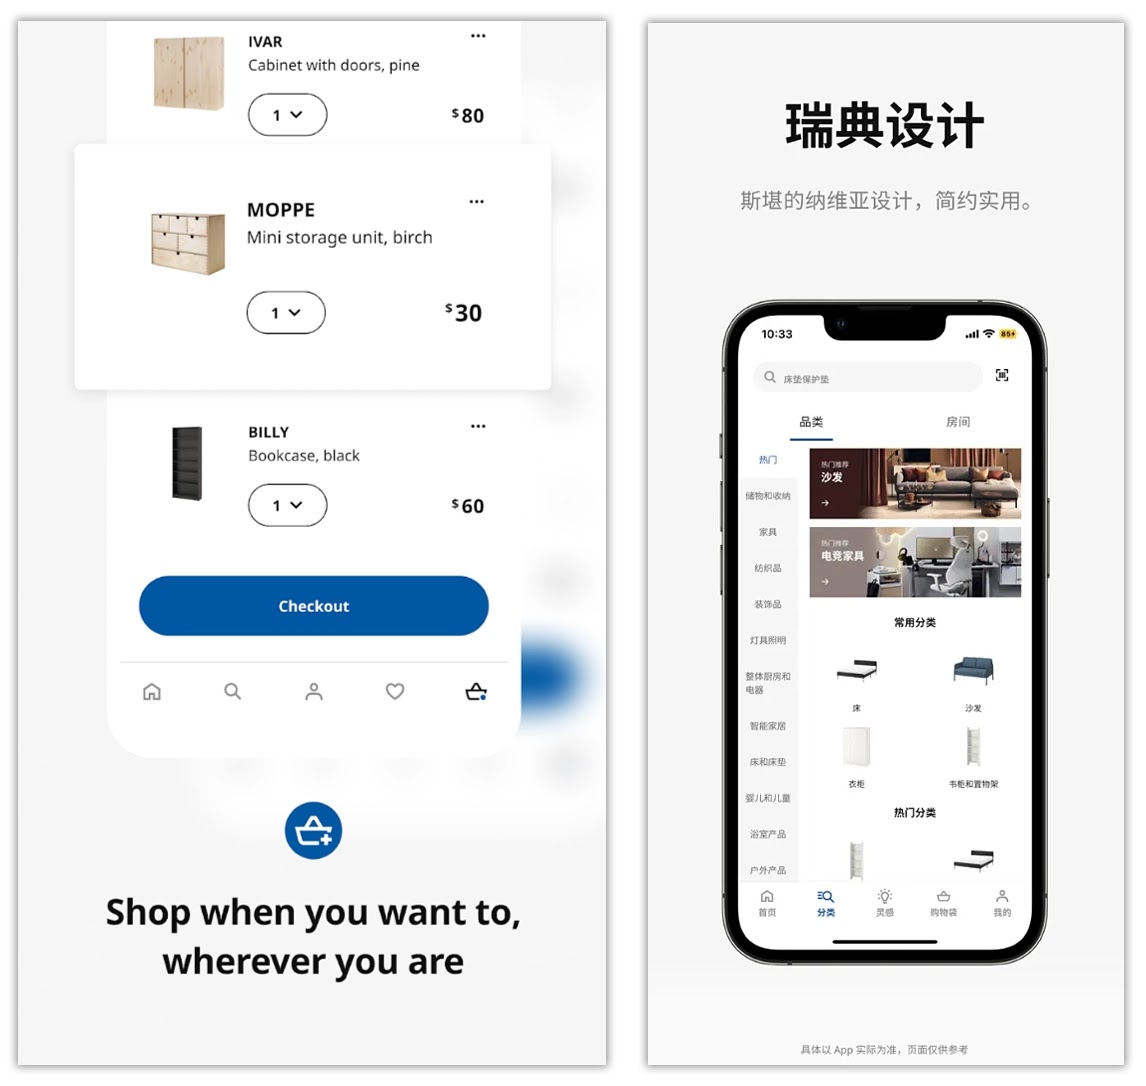 IKEA's app products successful  English (left) and Chinese (right)